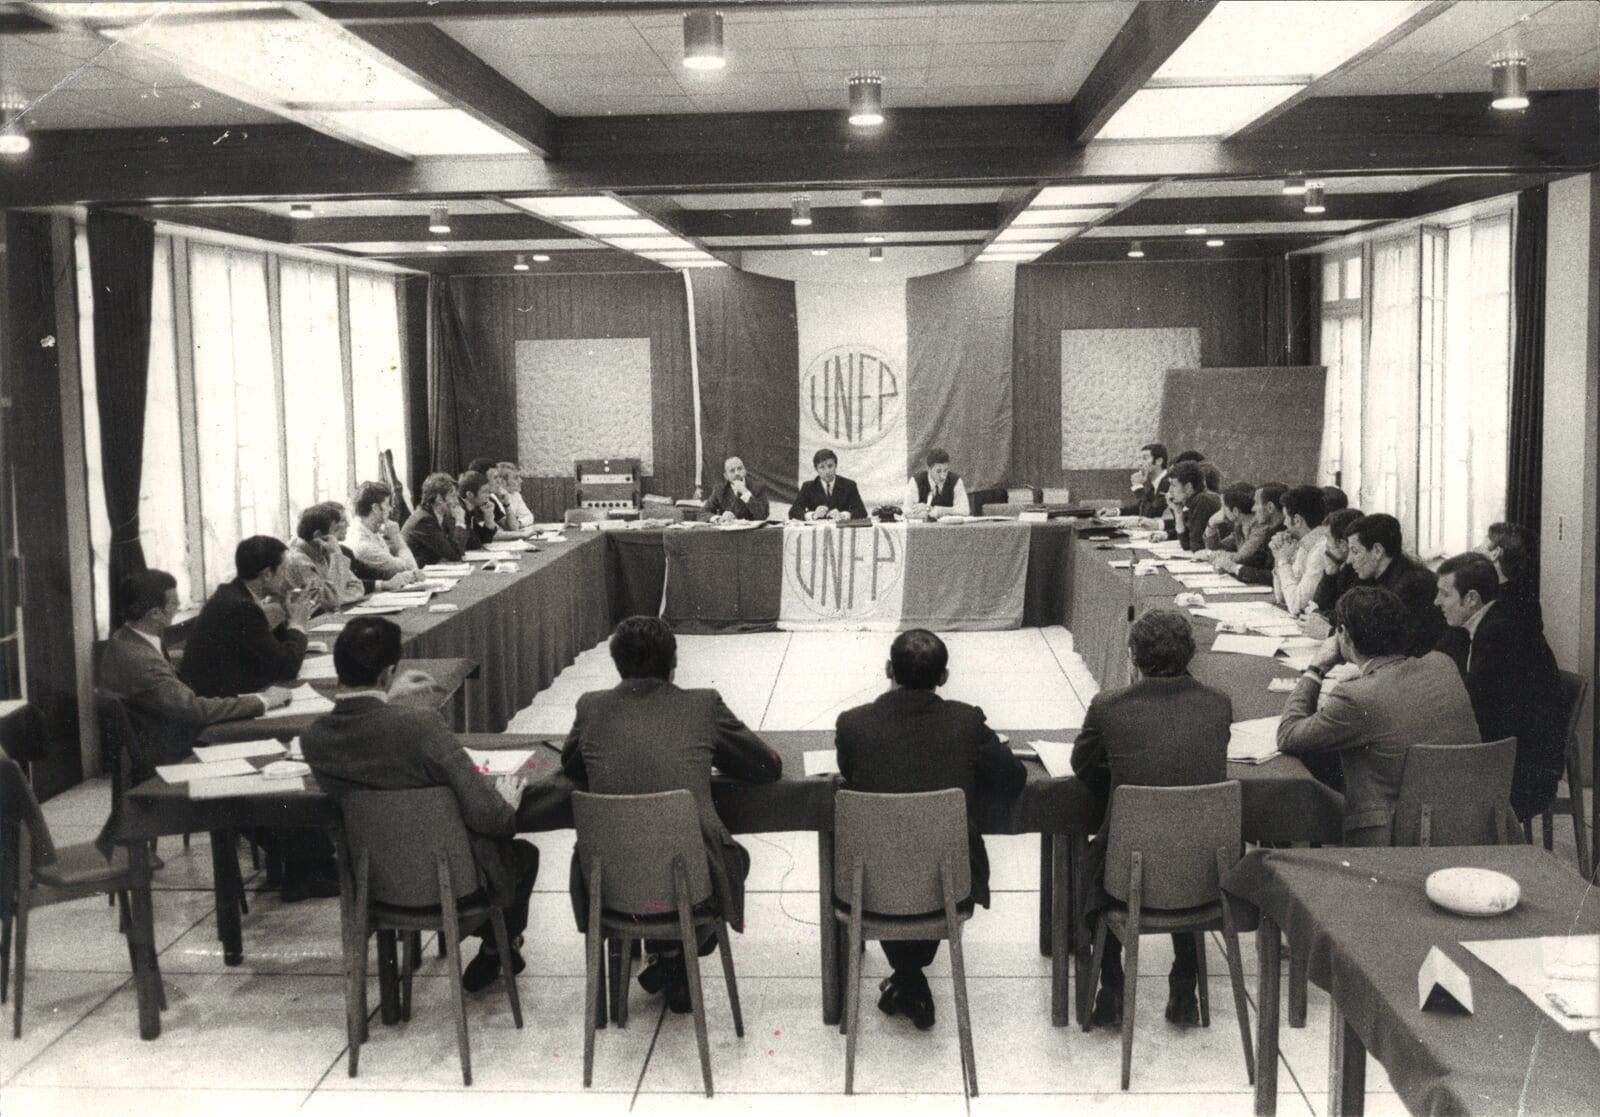 1969, General Assembly of the UNFP, in the center from left to right: Jacques Bertrand, Michel Hidalgo and Bruno Bollini